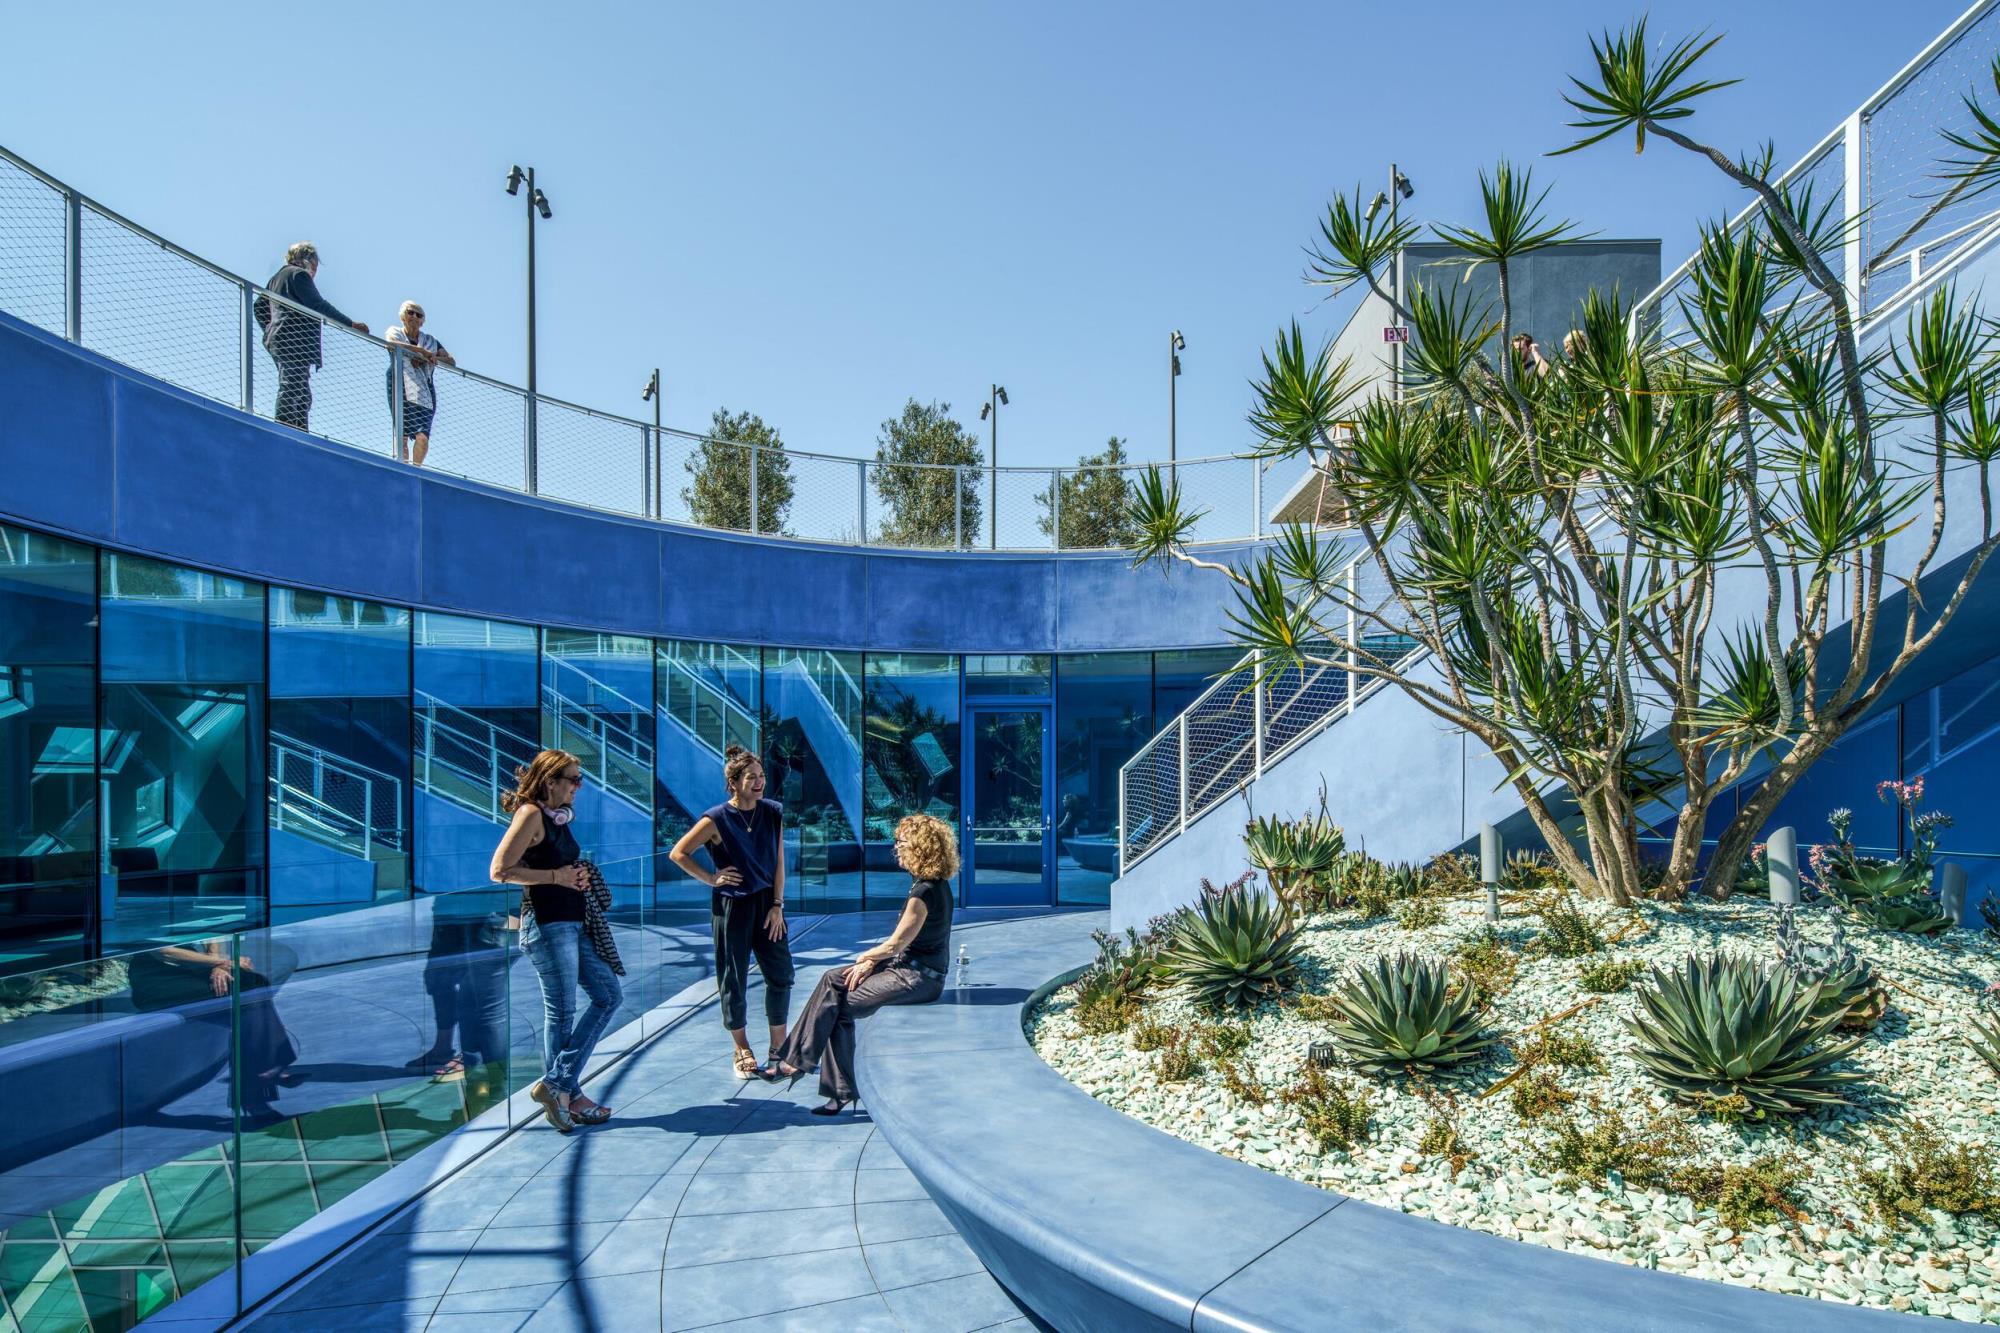 Exterior view of the Audrey Irmas Pavilion courtyard. The space is comprised of blue and green glass as well as furniture. People are congregating.